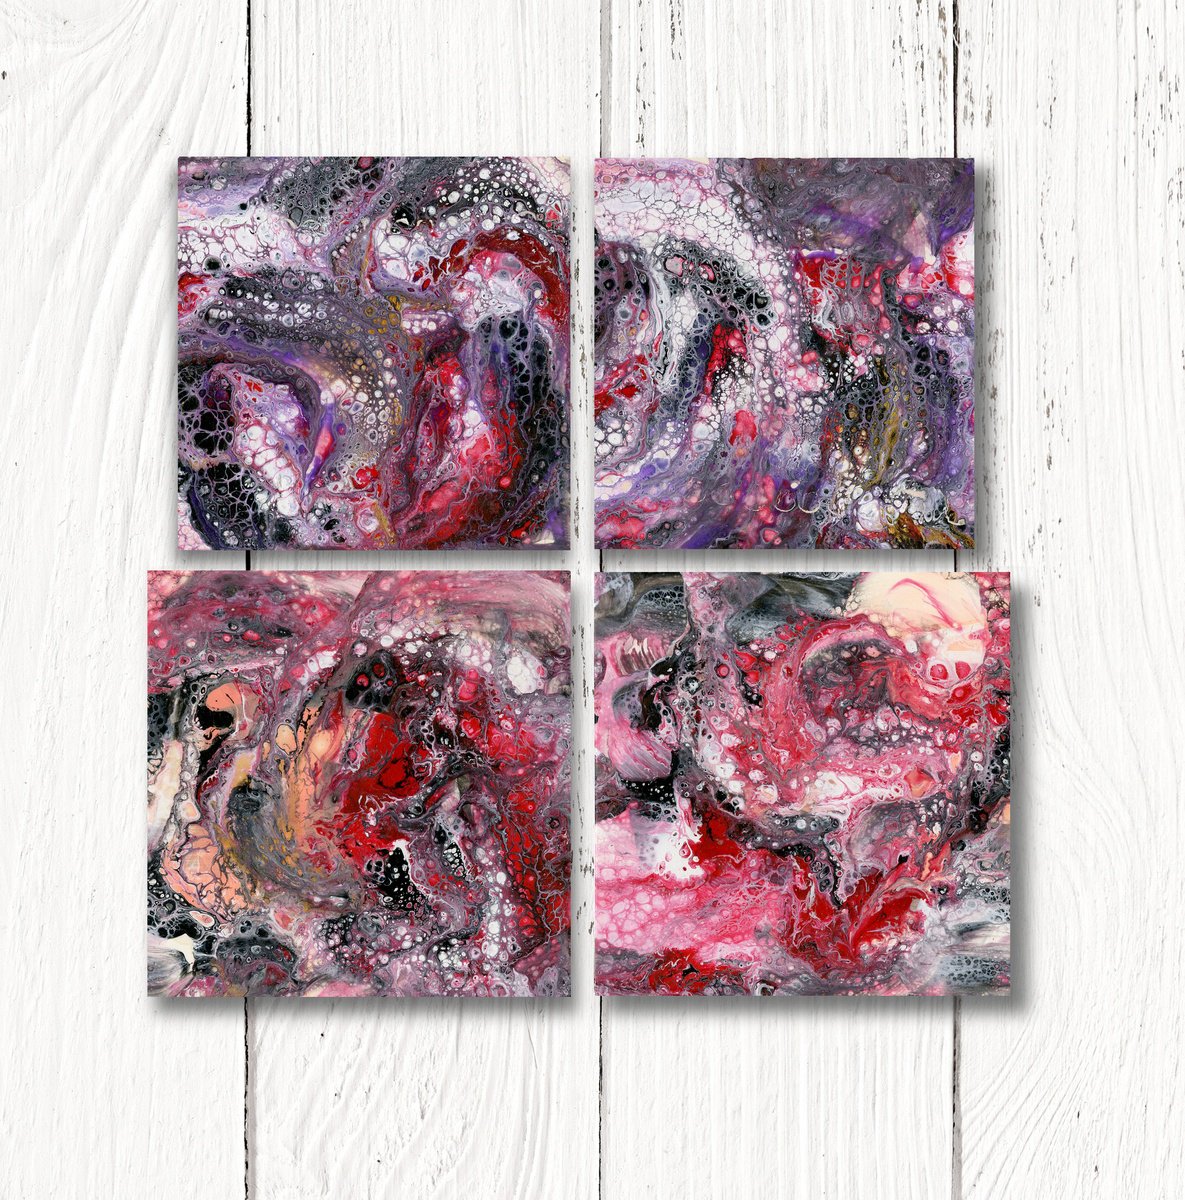 A Creative Soul Collection 2 - 4 Small Abstract Paintings by Kathy Morton Stanion by Kathy Morton Stanion